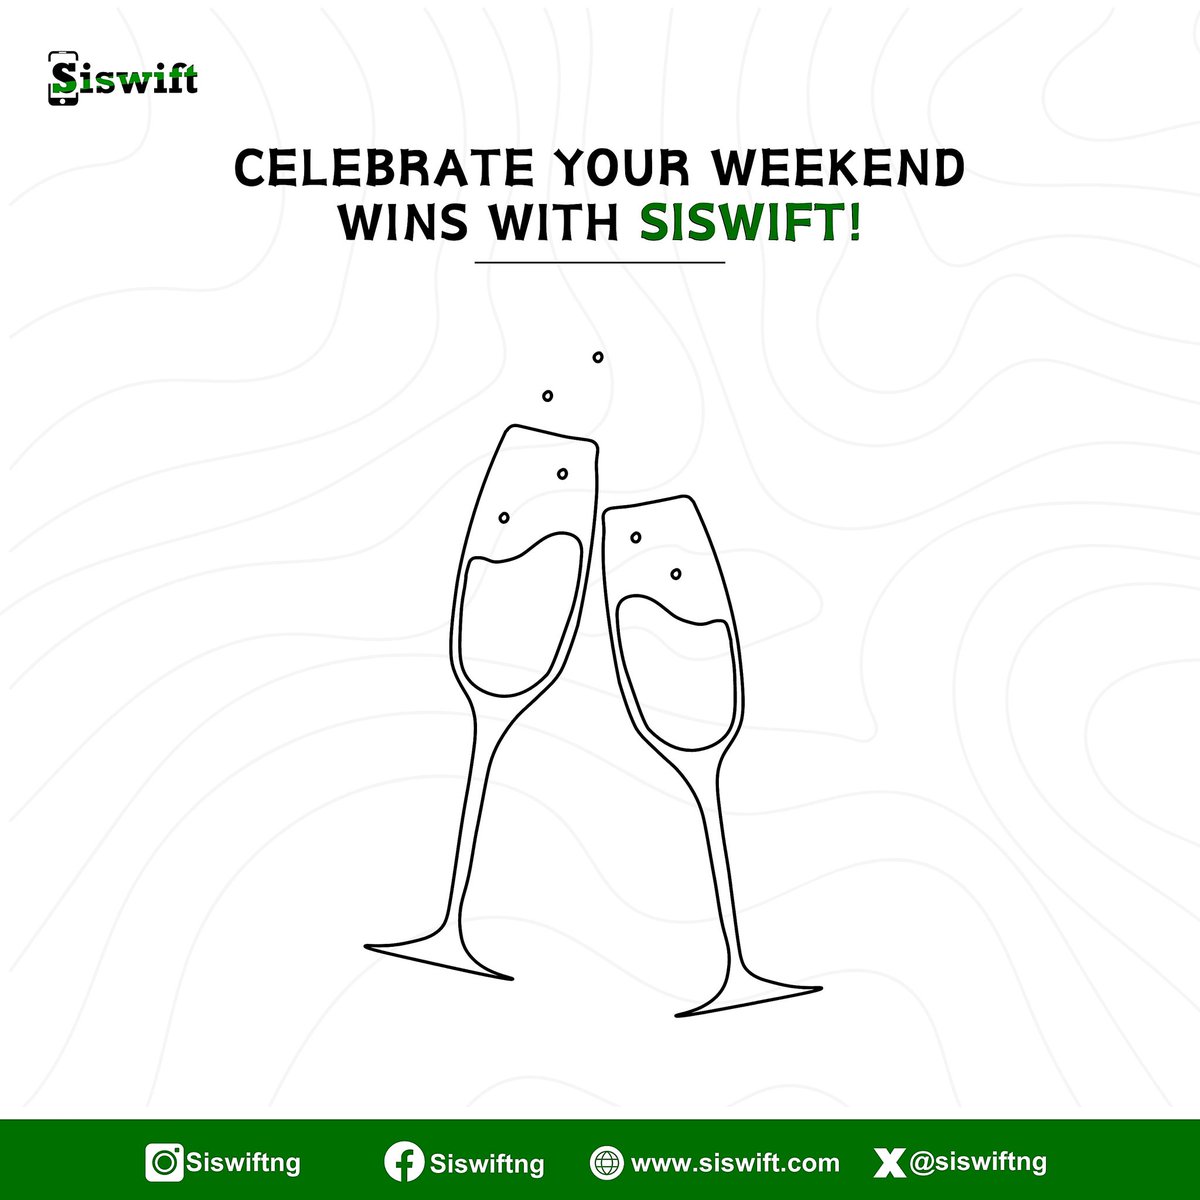 Celebrate weekend deals with Siswift! 

Toast to savings and satisfaction!
.
.
.
#Siswift #WeekendCelebration #transparenttransactions #negotiationpower #changingthegame #convenience #convenienceoverfixedprices #digitalmarketing #iphones #phones